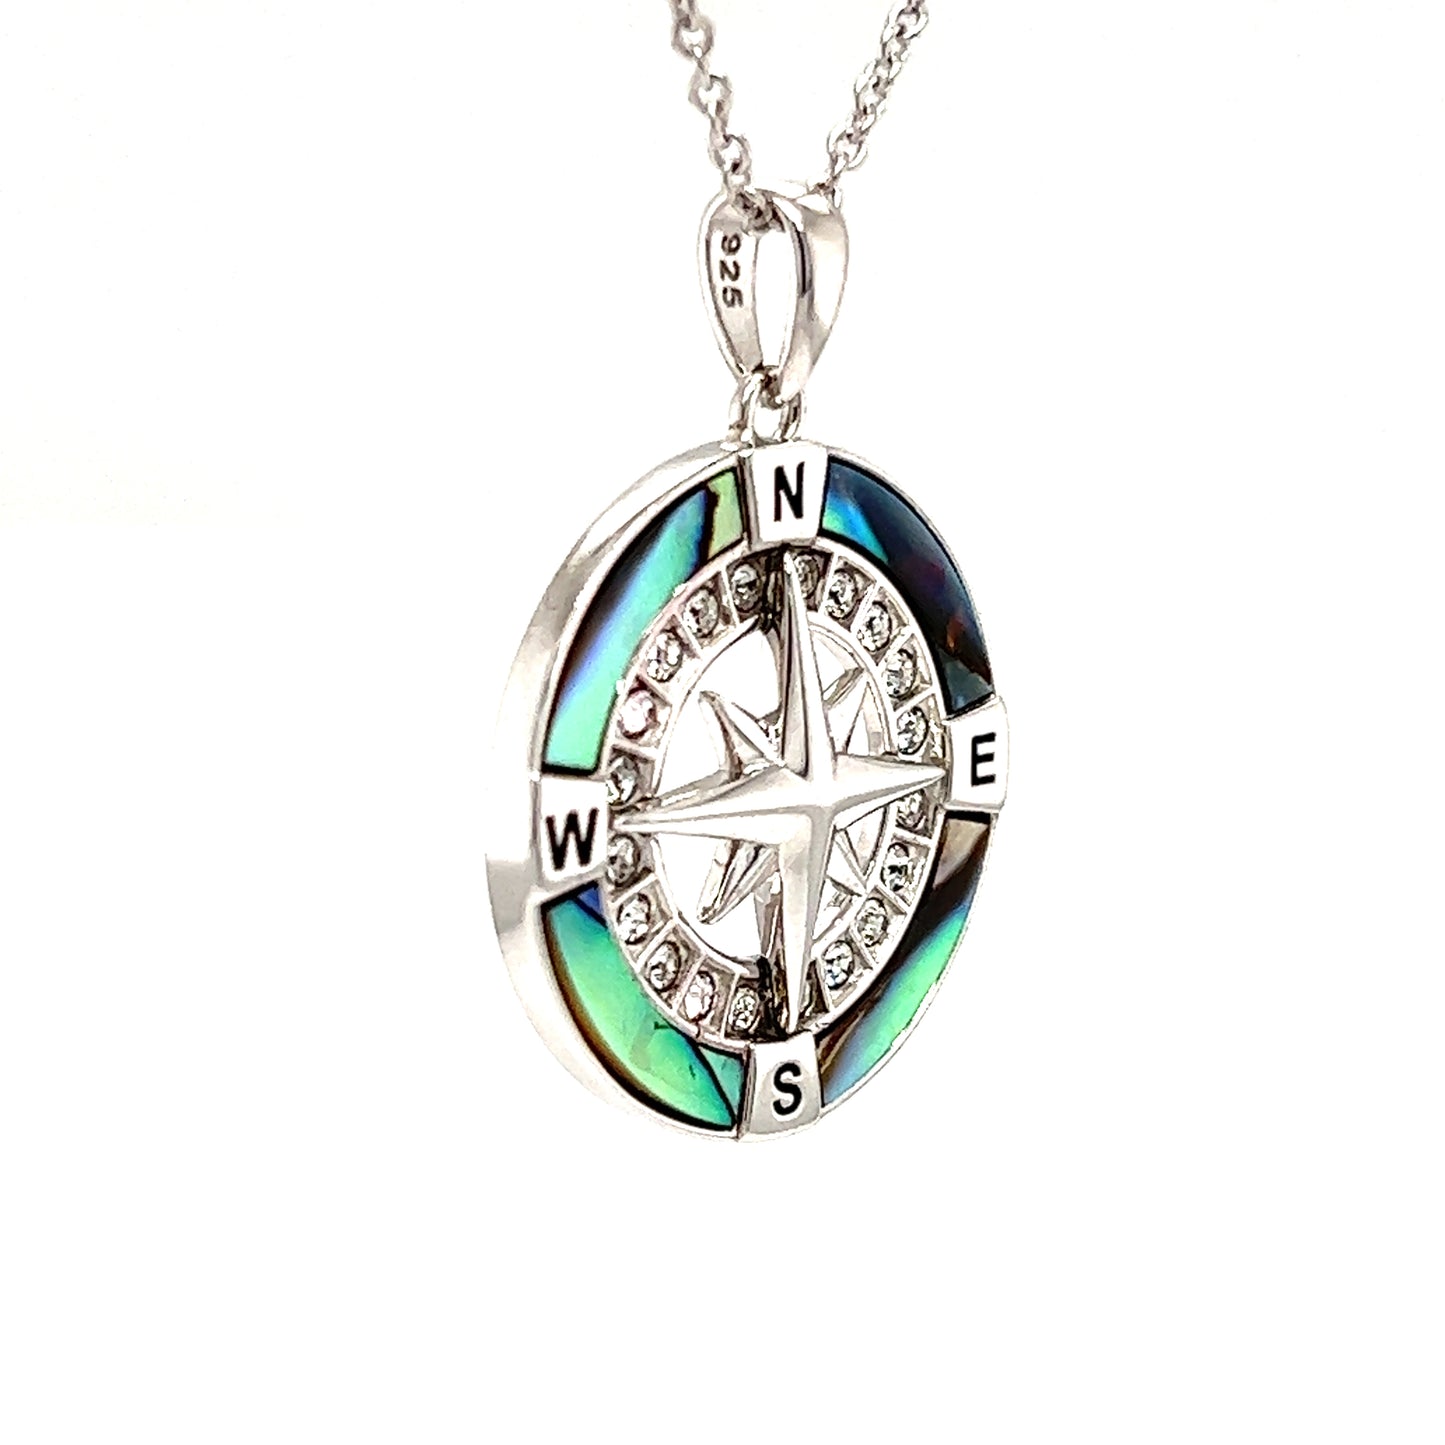 Abalone Shell Compass Necklace with Crystals in Sterling Silver Right Side View